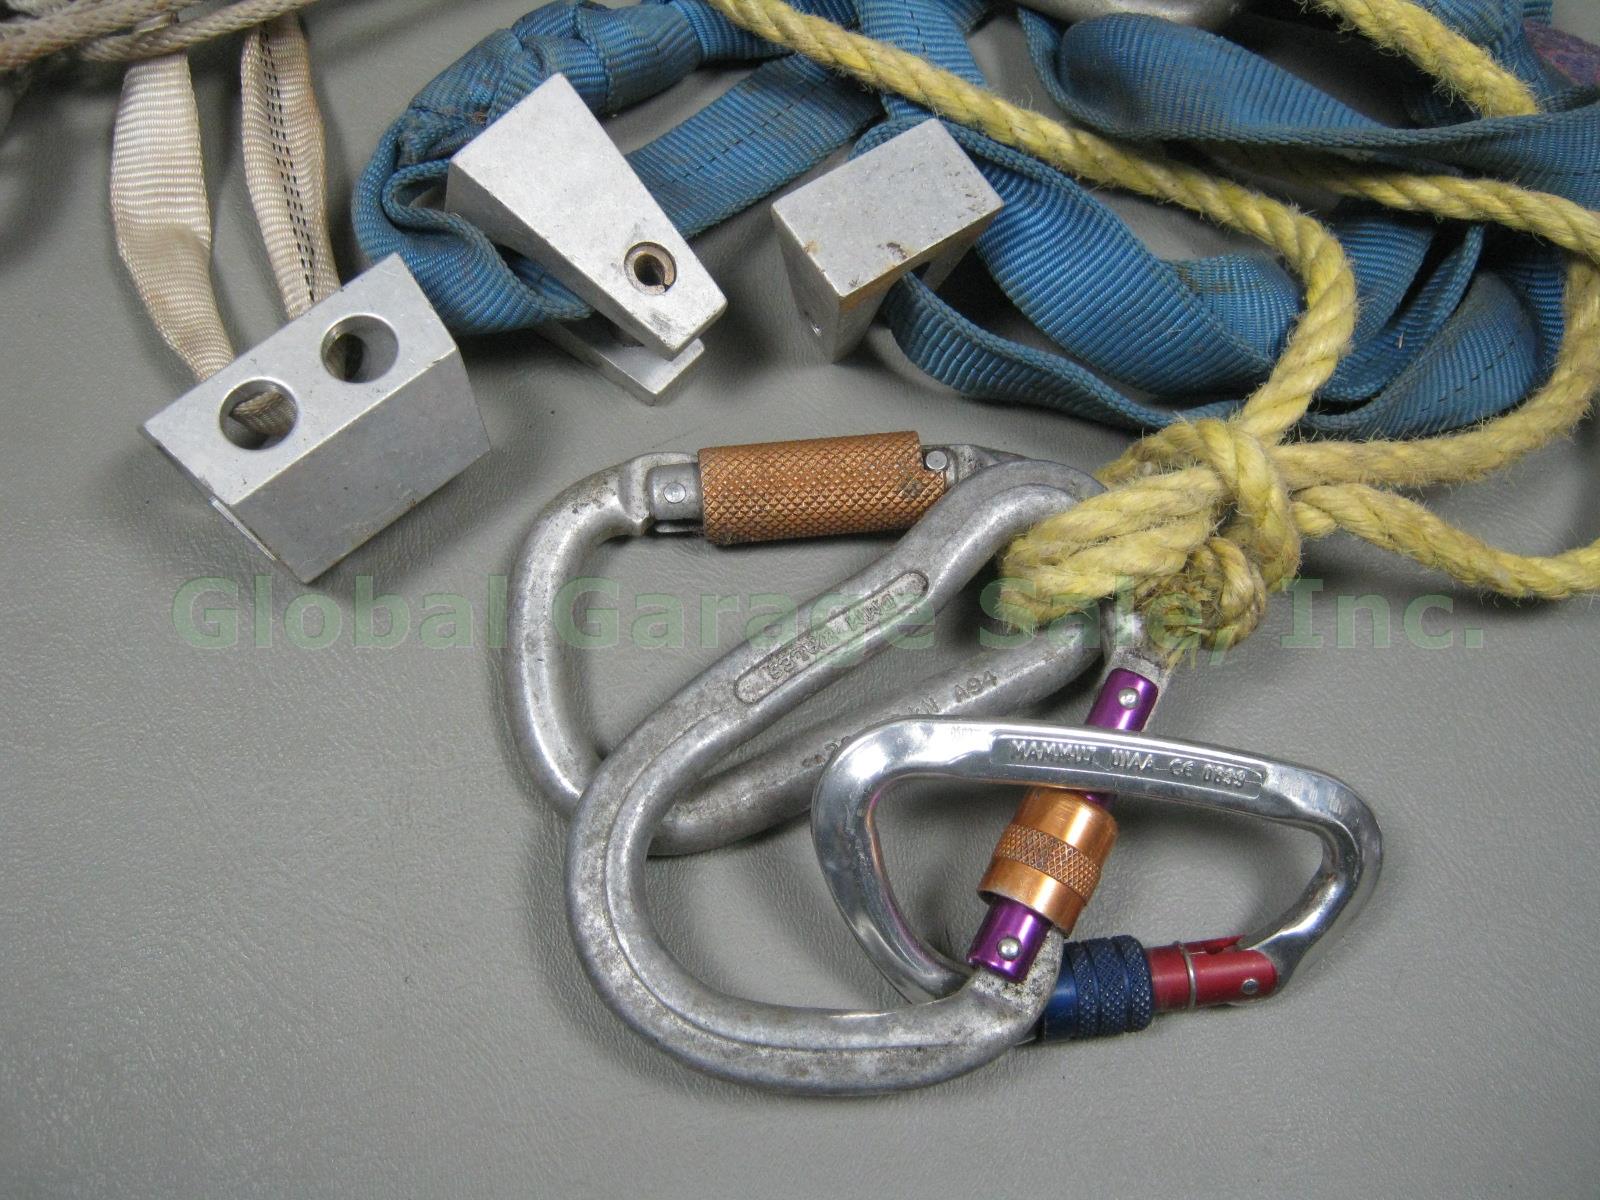 Rock Ice Climbing Gear Lot 8 Carabiner Locking Descender Drilled Hexentric Chock 2